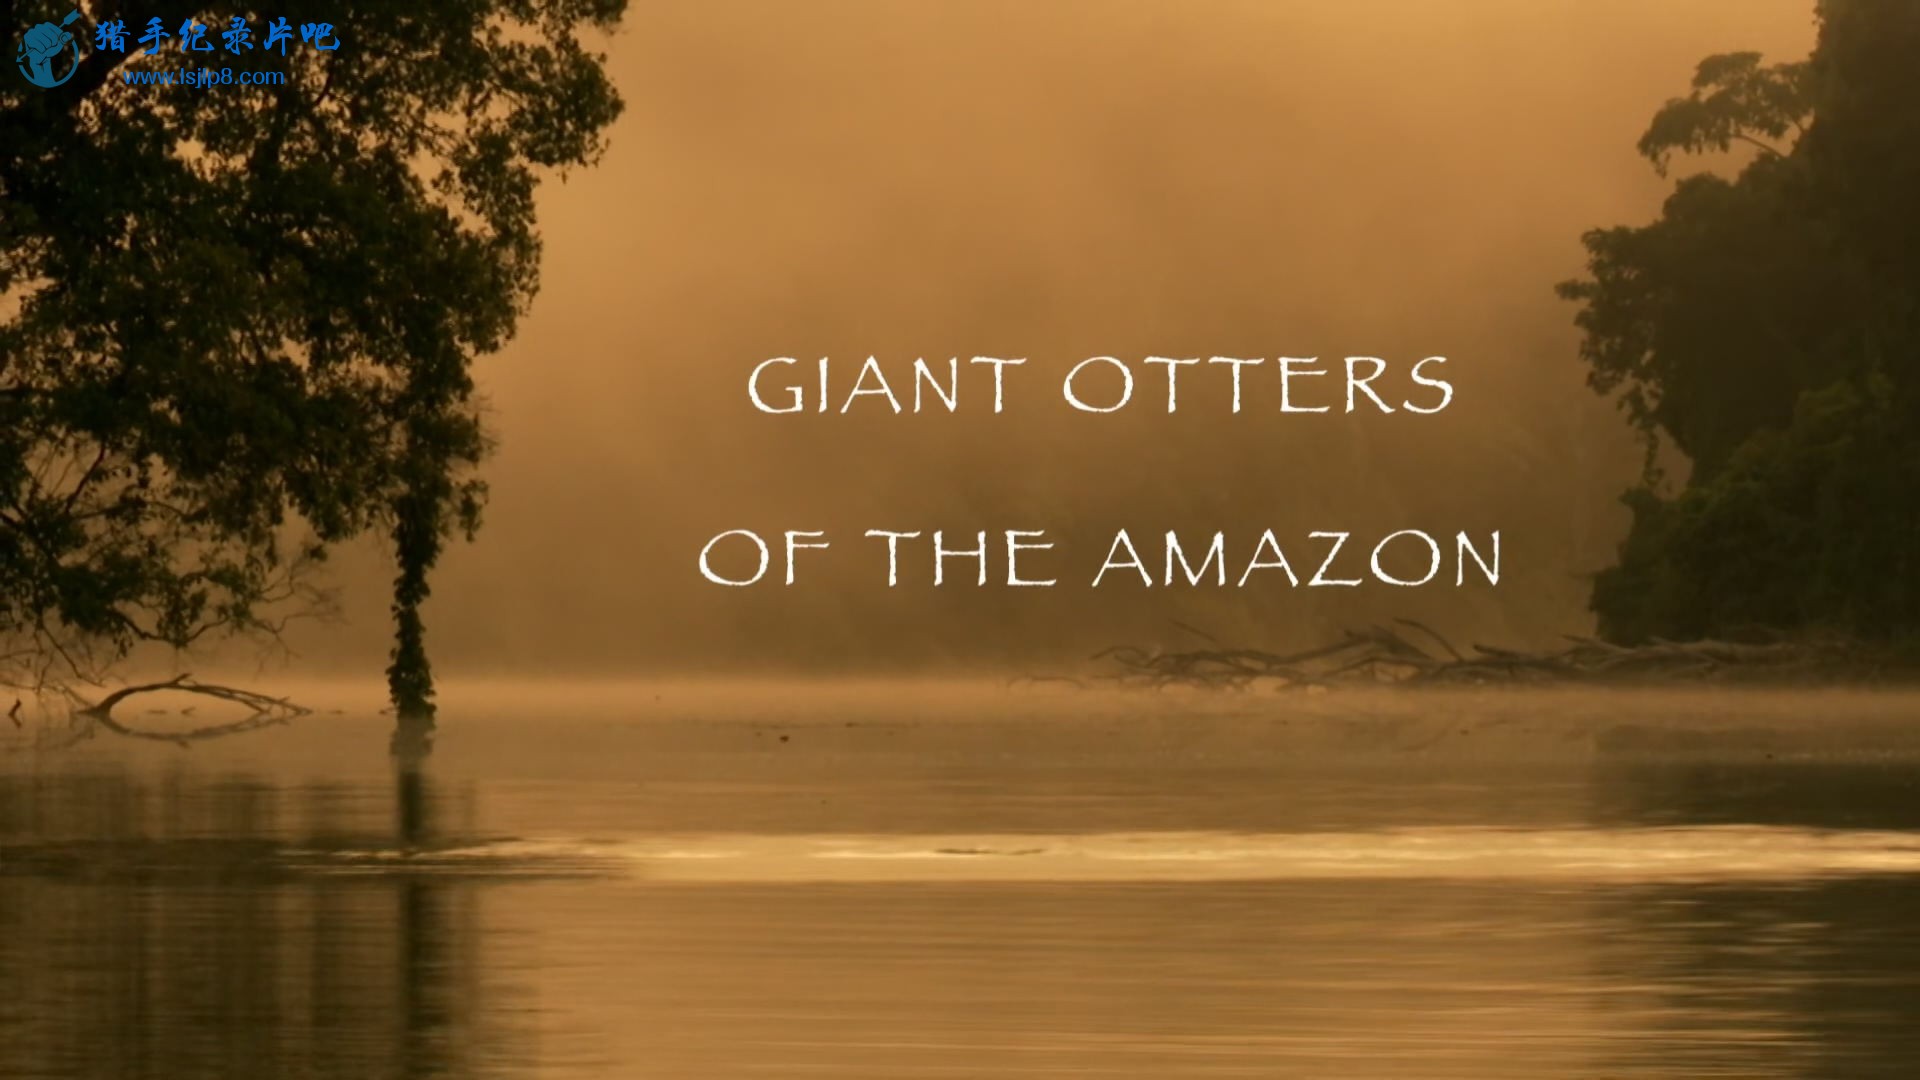 BBC.Natural.World.2013.Giant.Otters.of.the.Amazon.1080p.HDTV.x265.AAC.MVGroup.org.jpg